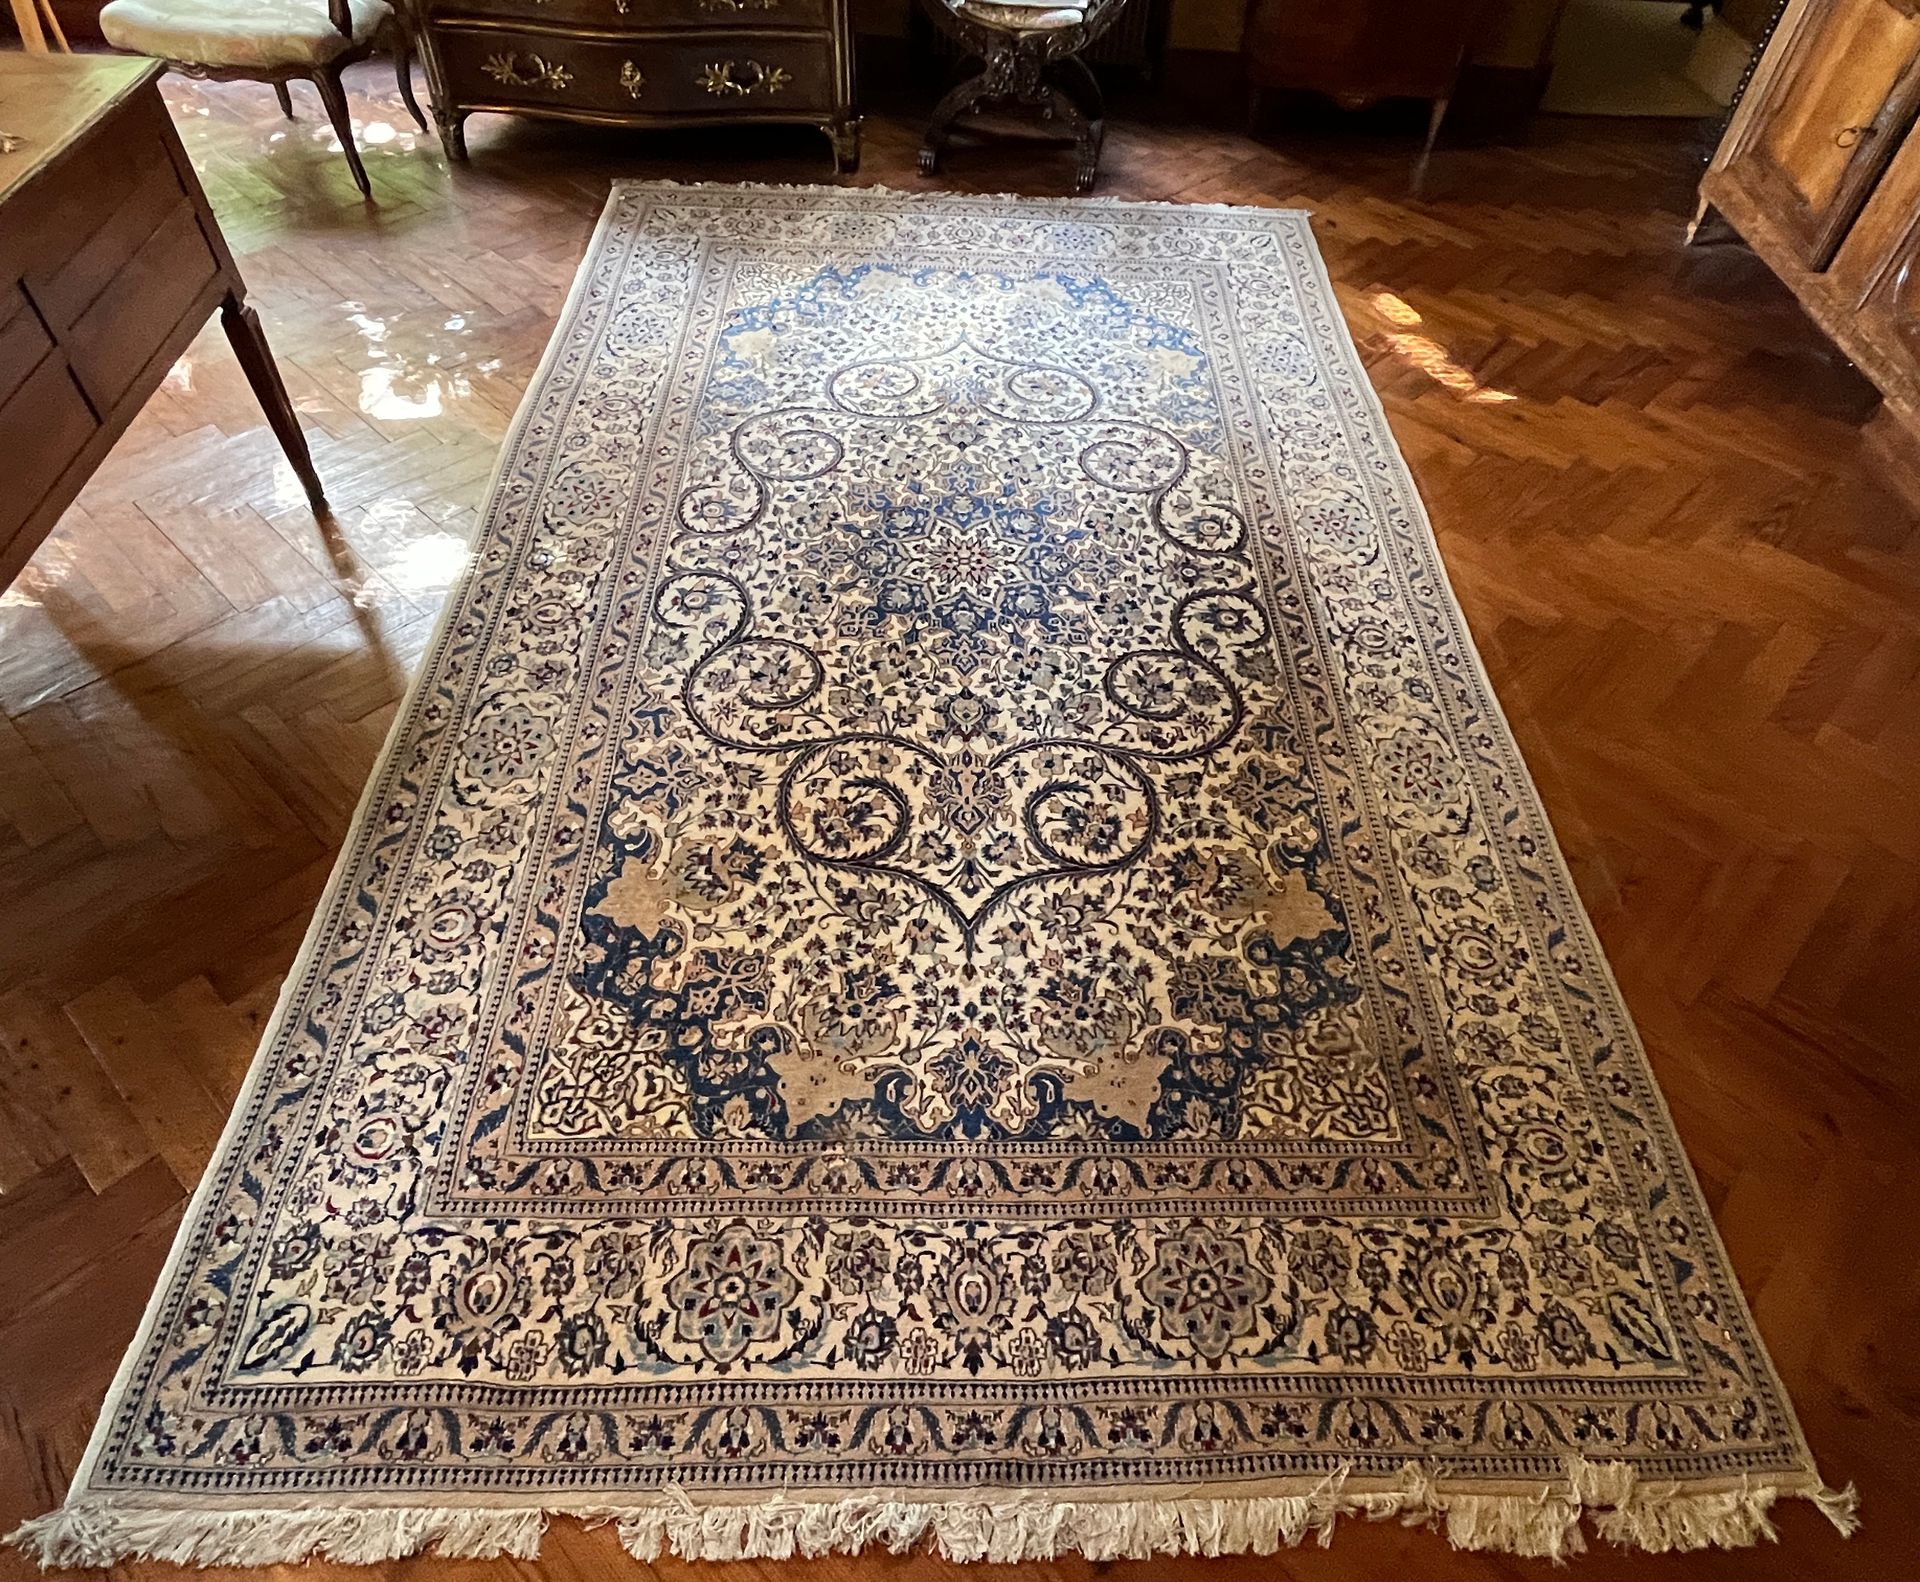 Null 84. Large Persian carpet, MELAHIR

Wool and silk

Ornamented with scrolls a&hellip;